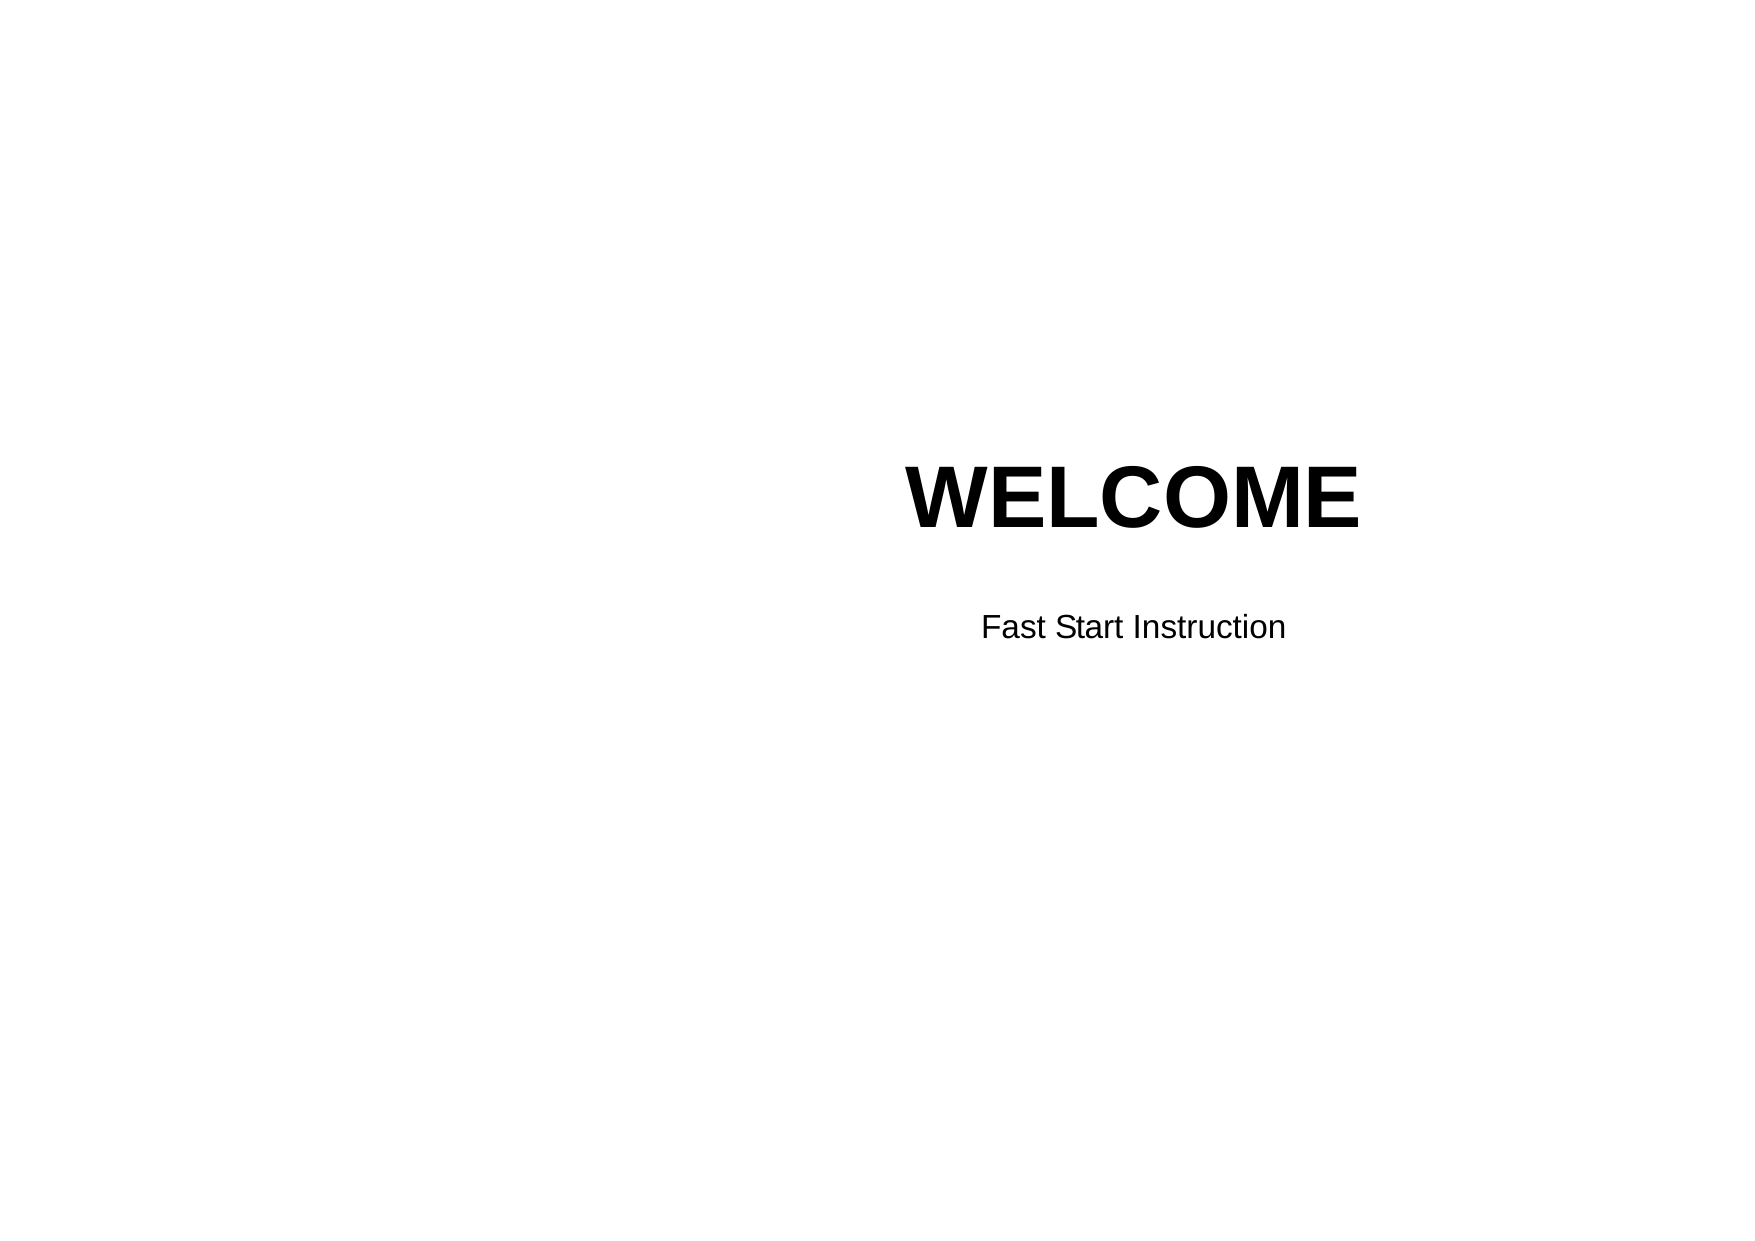    WELCOME  Fast Start Instruction   